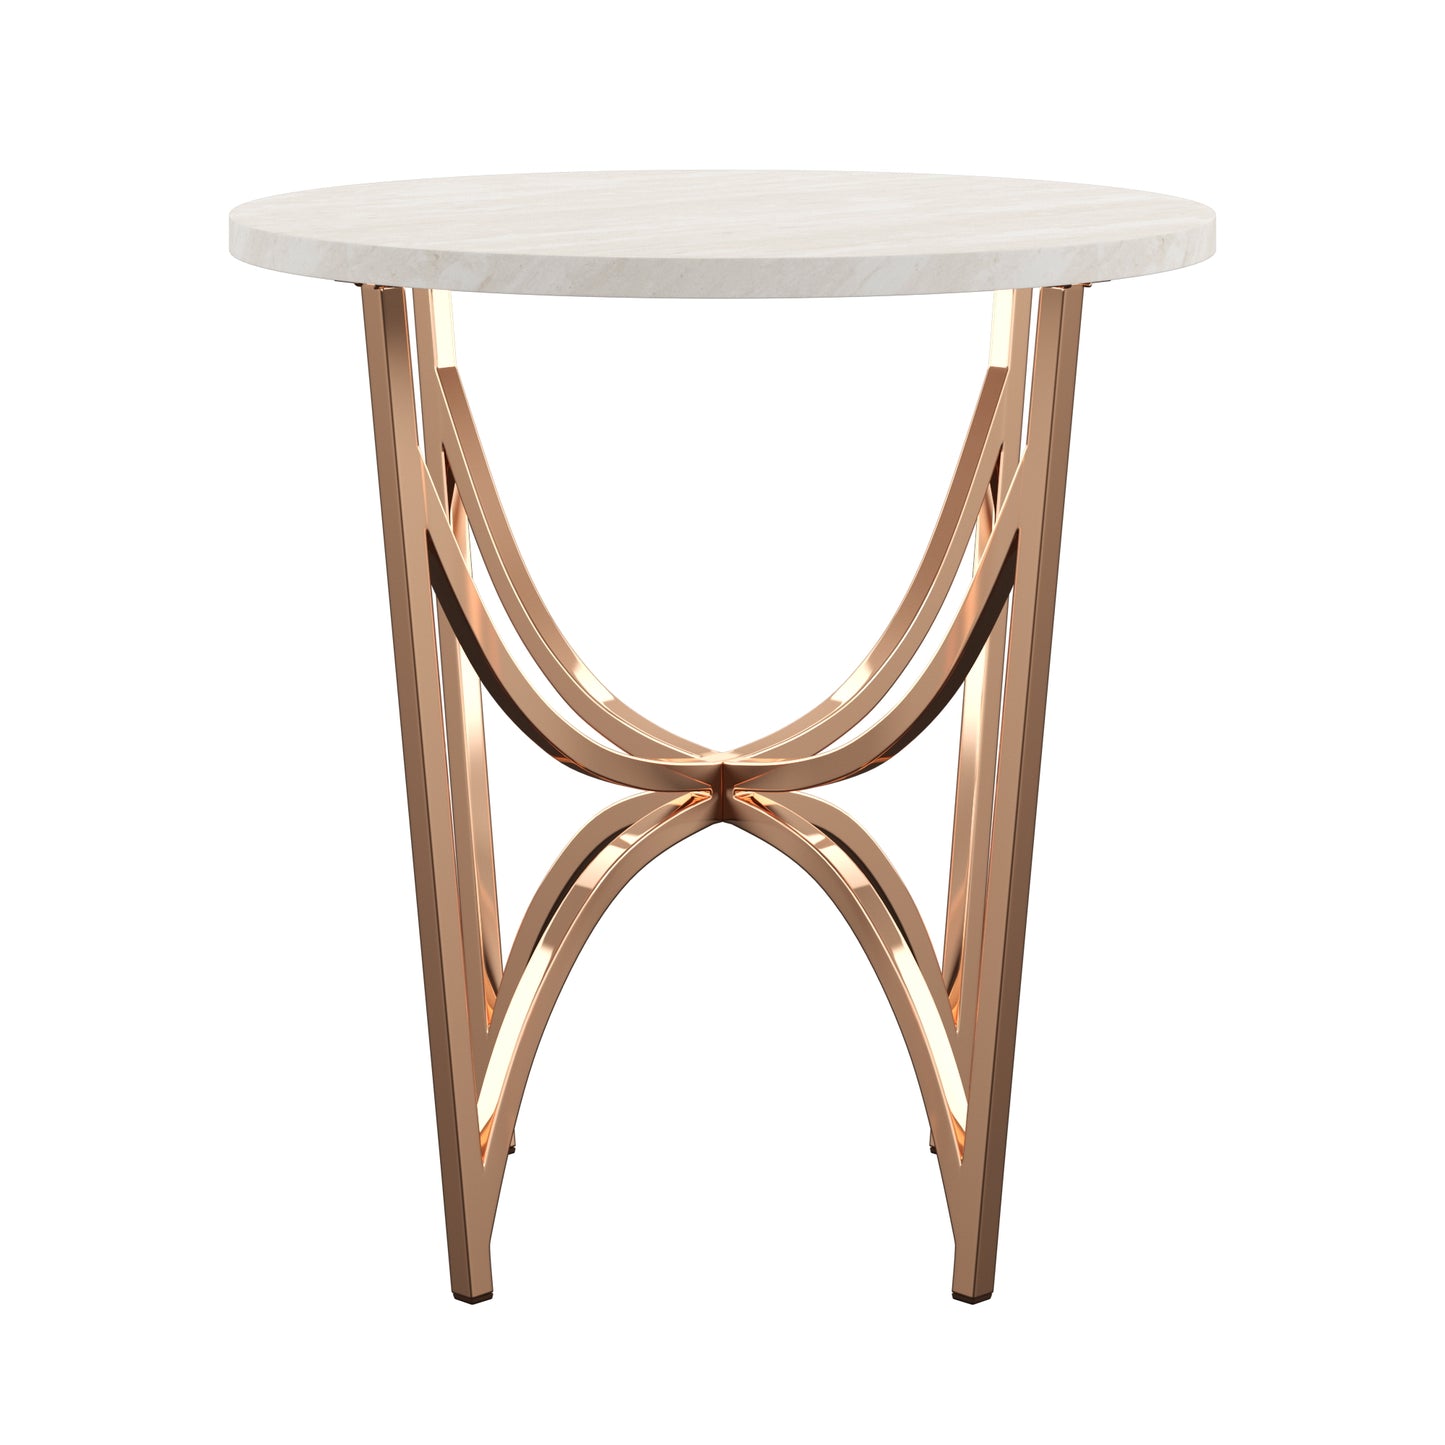 Champagne Gold Finish Table Set with White Faux Marble Top - End Table and Coffee Table